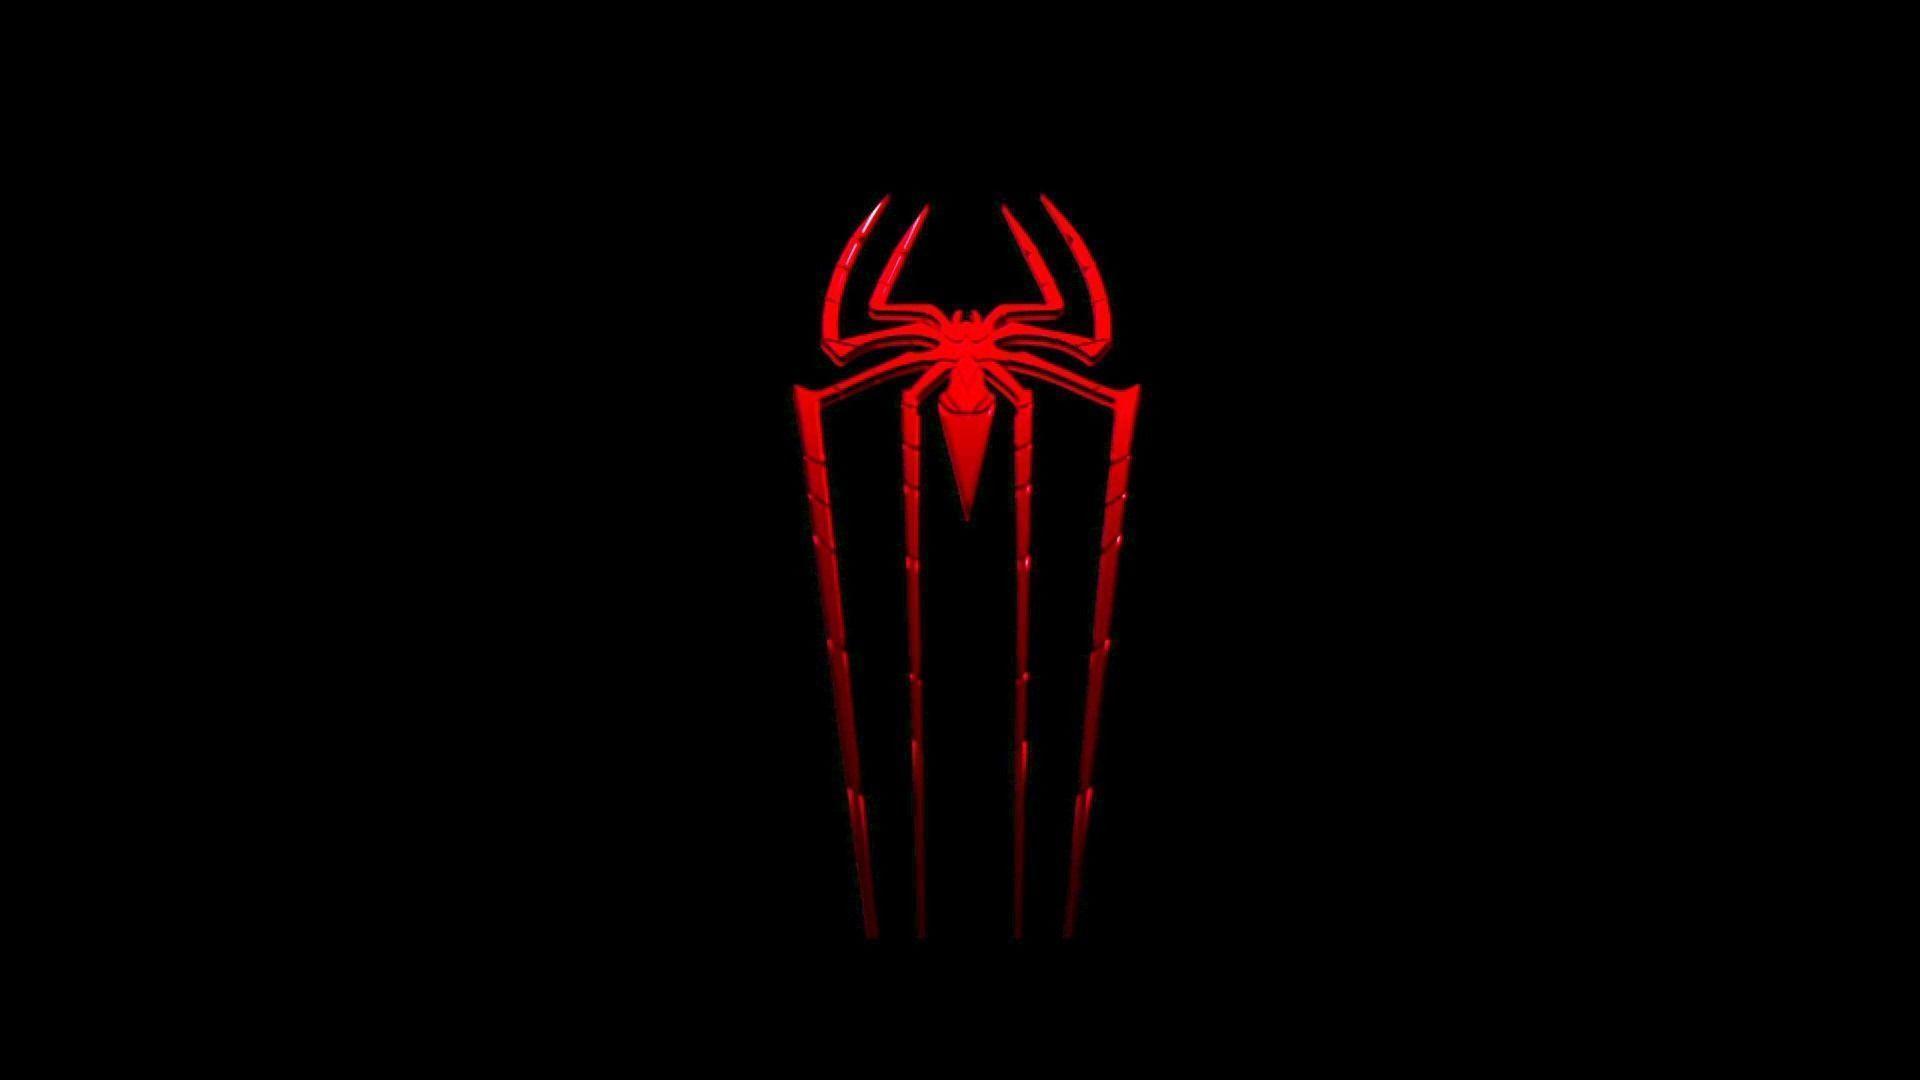 Amazing SpiderMan Live WP Android Apps on Google Play 1920×1080 HD